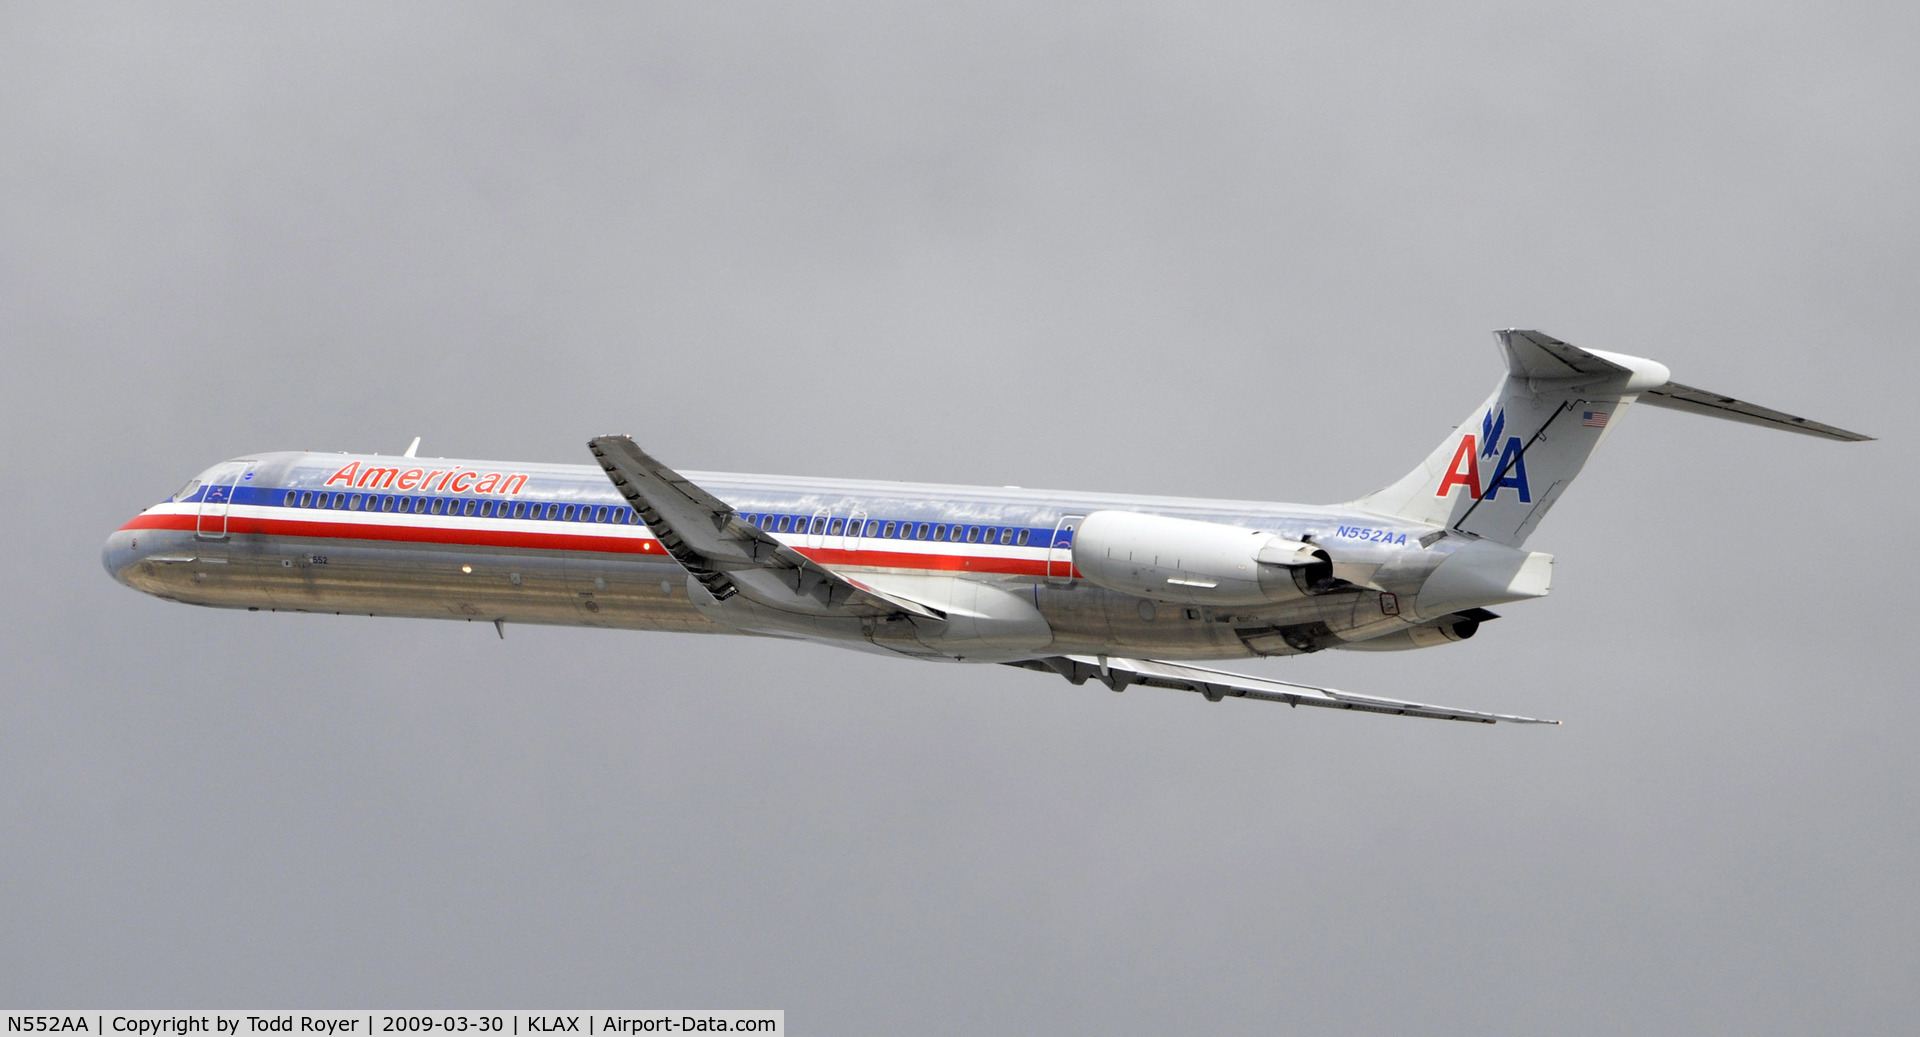 N552AA, 1991 McDonnell Douglas MD-82 (DC-9-82) C/N 53034, Departing LAX on 25R